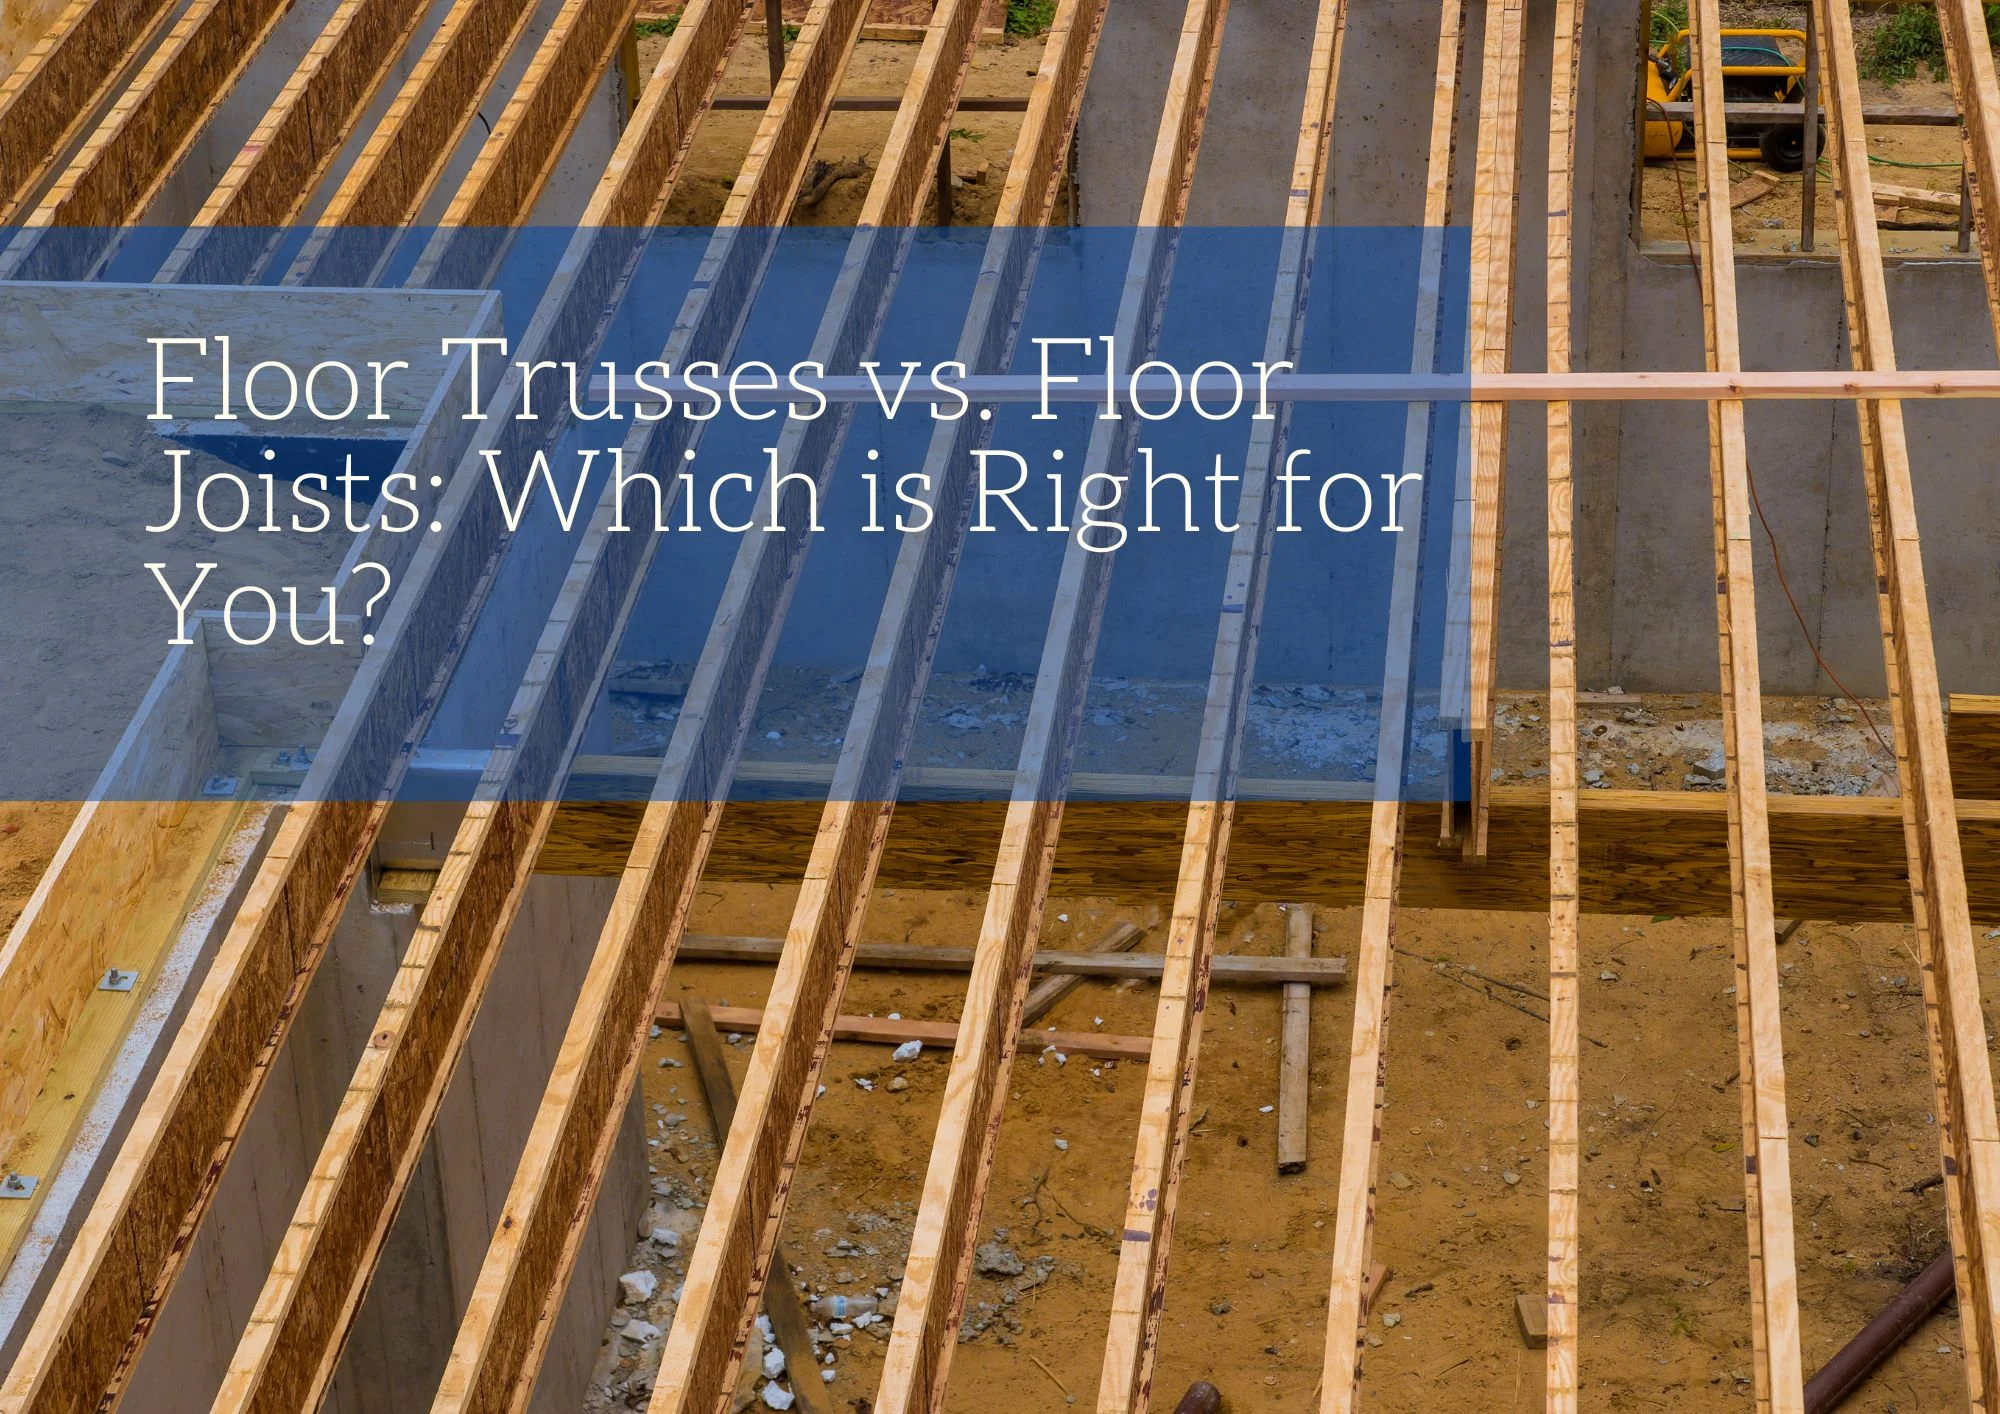 Floor Trusses vs. Floor Joists: Which is Right for You?